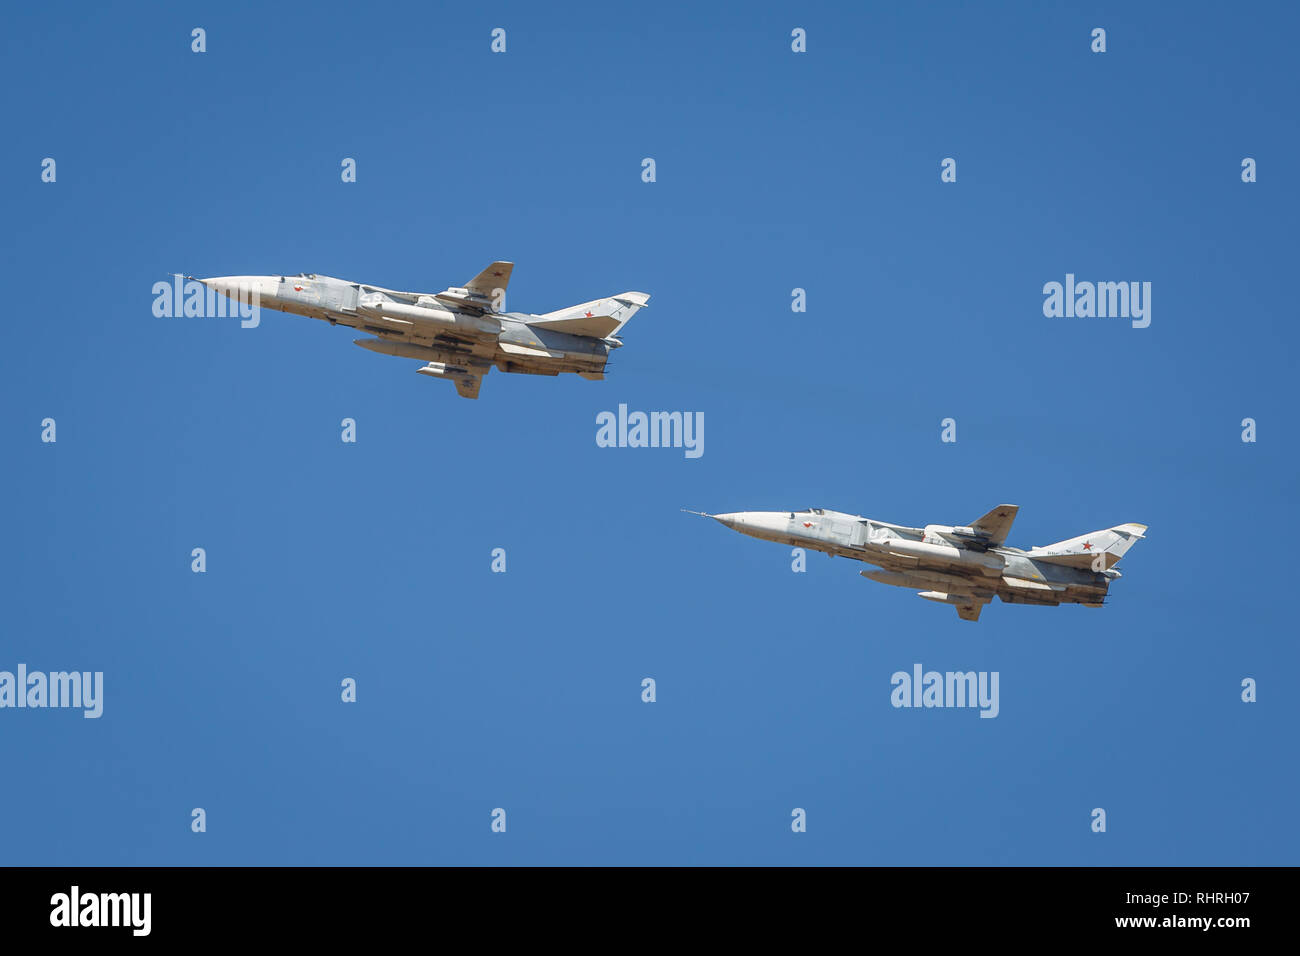 International military technical forum ARMY-2018. A pair of SU-24 aircraft perform demonstration flights in the sky over a military training ground Stock Photo